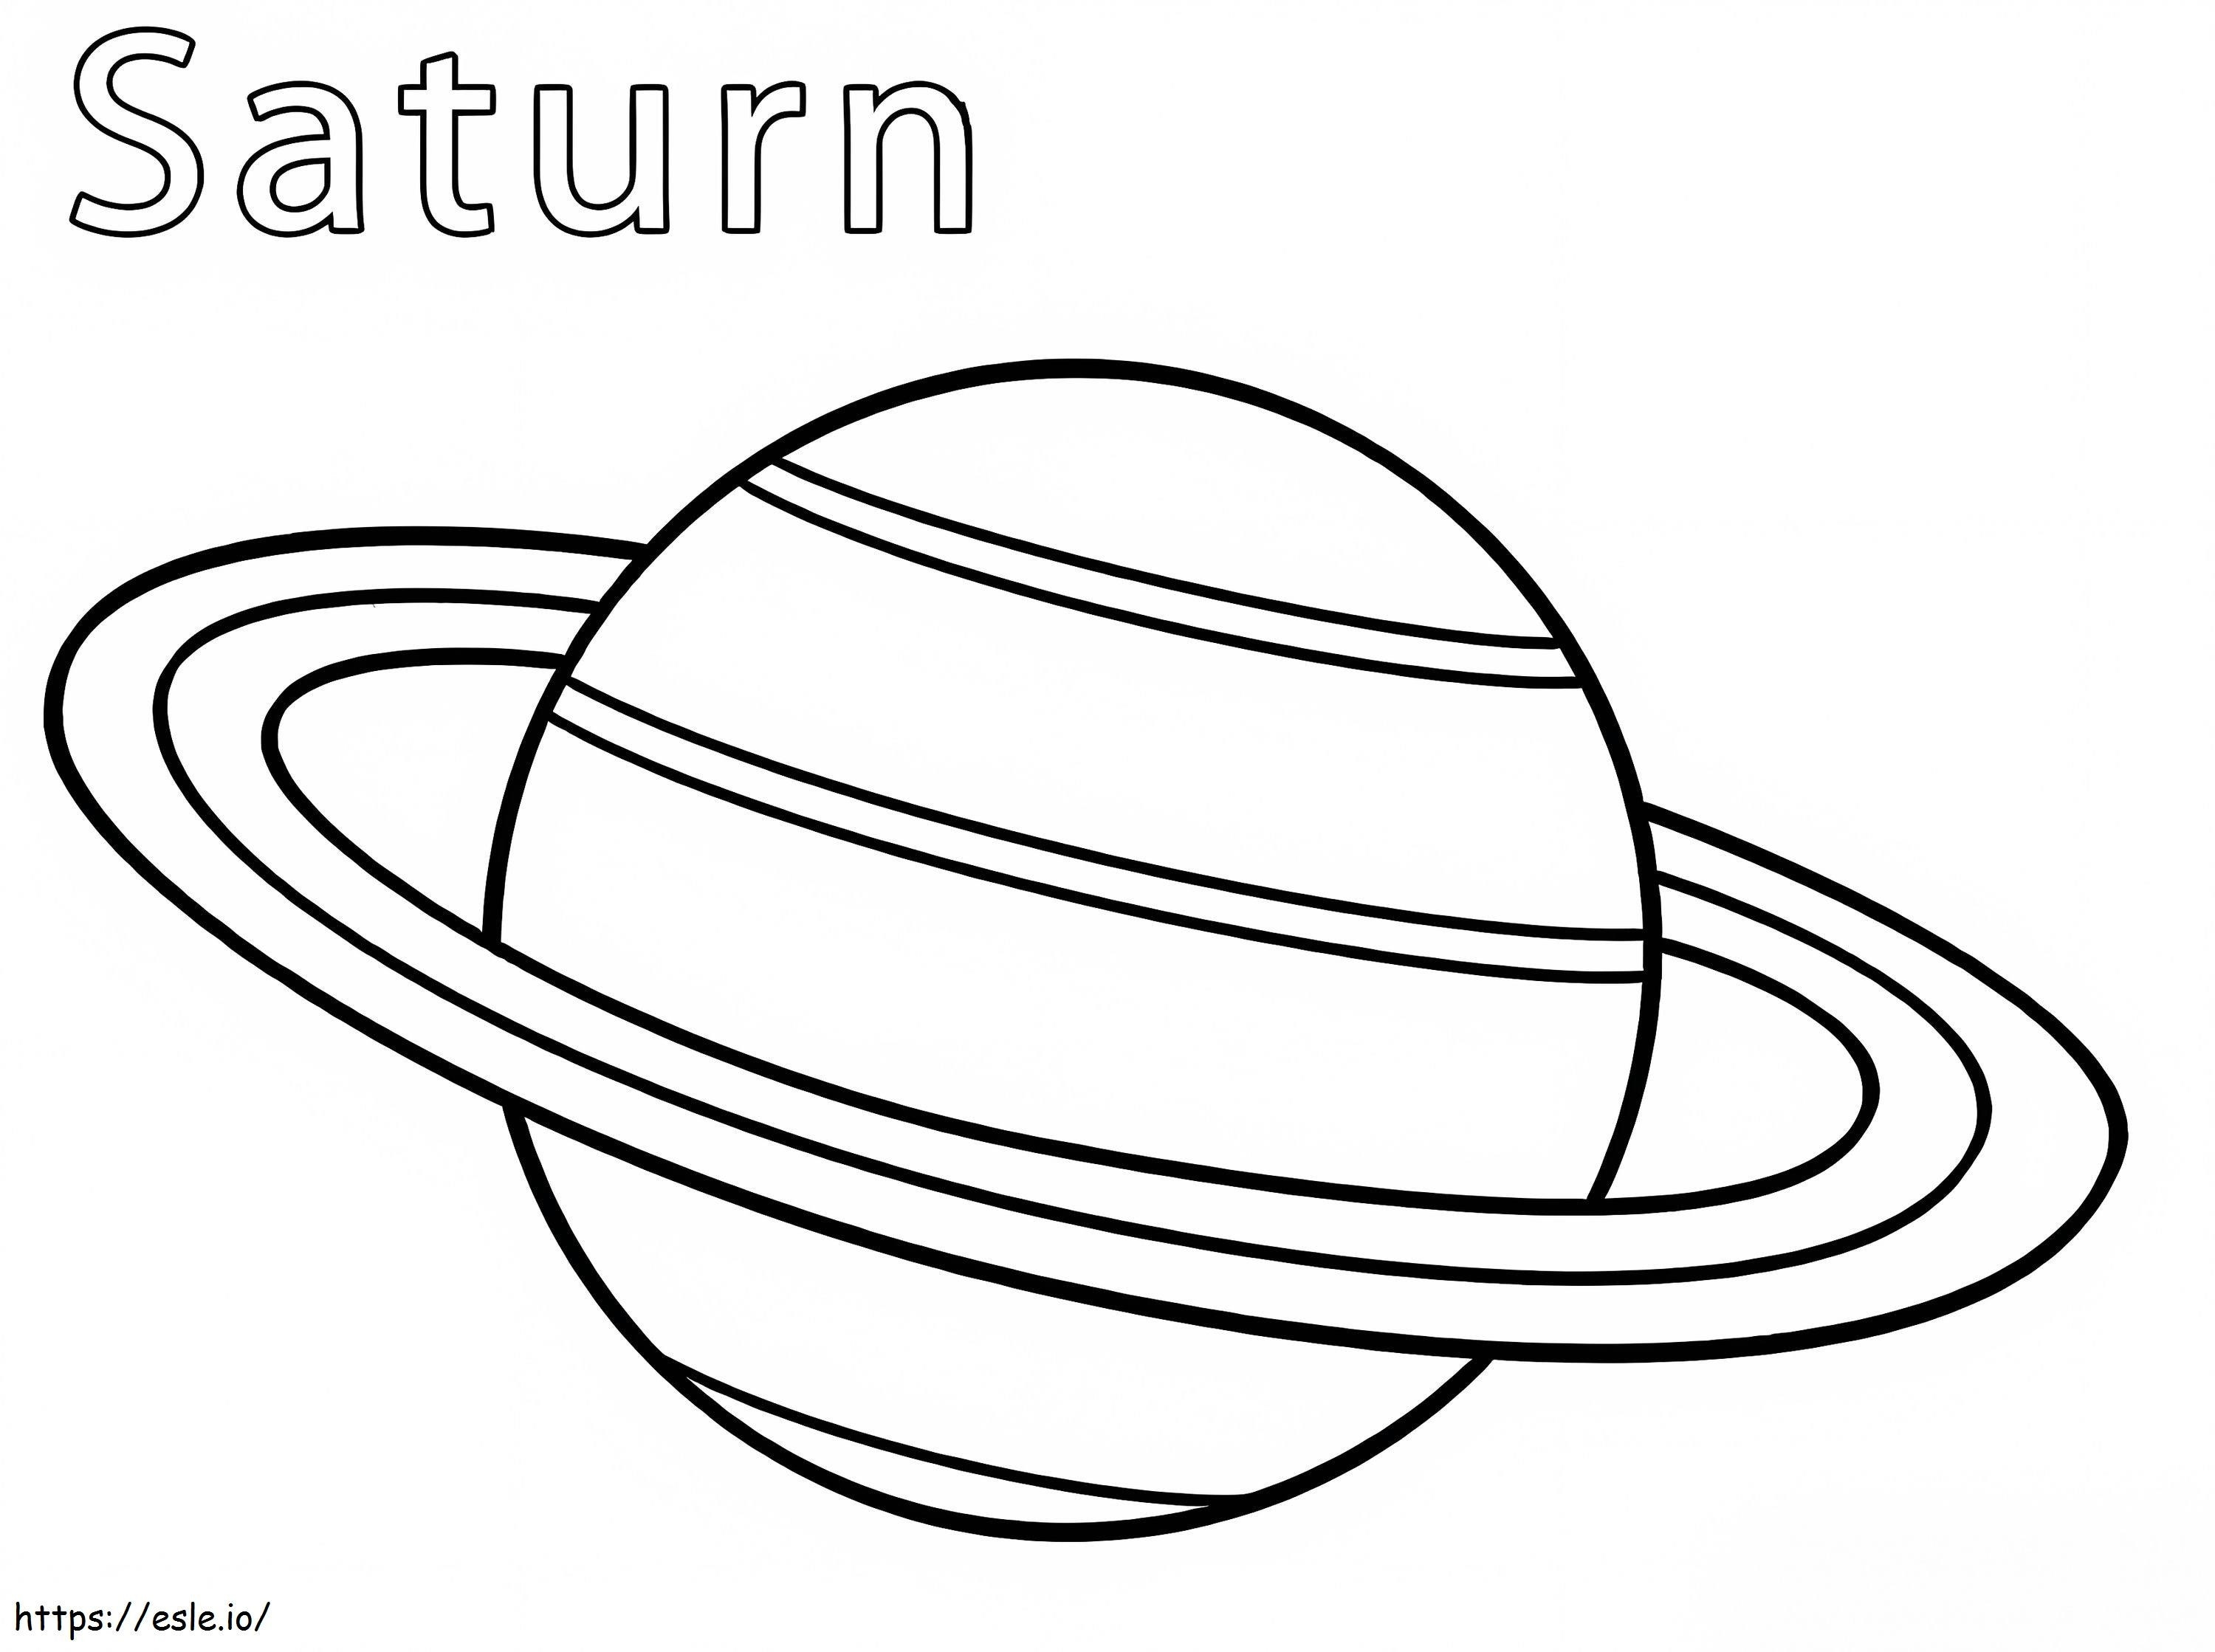 Planet Saturn 2 coloring page